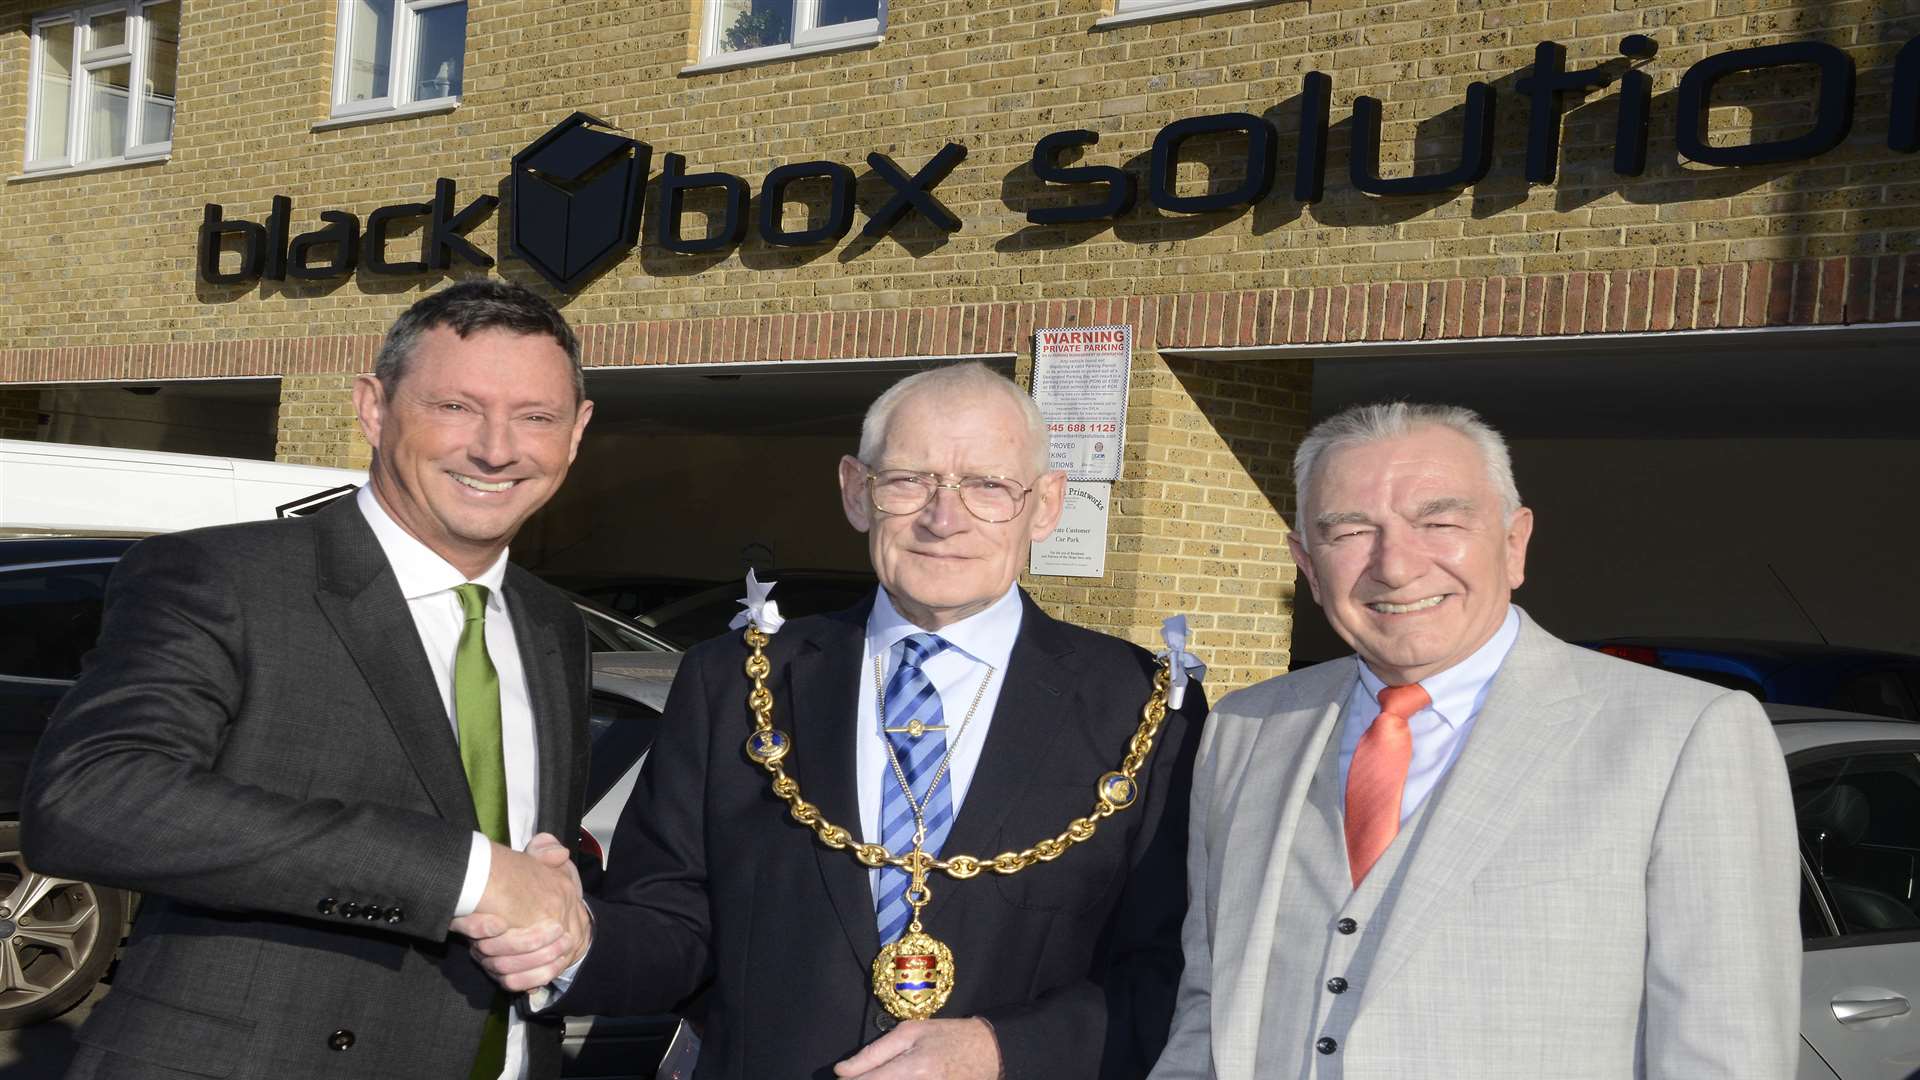 From left, Blackbox Solutions managing director Colin Griffin, the Mayor of Maidstone, Cllr Daniel Moriarty and Blackbox Solutions sales director Jonathan Devito